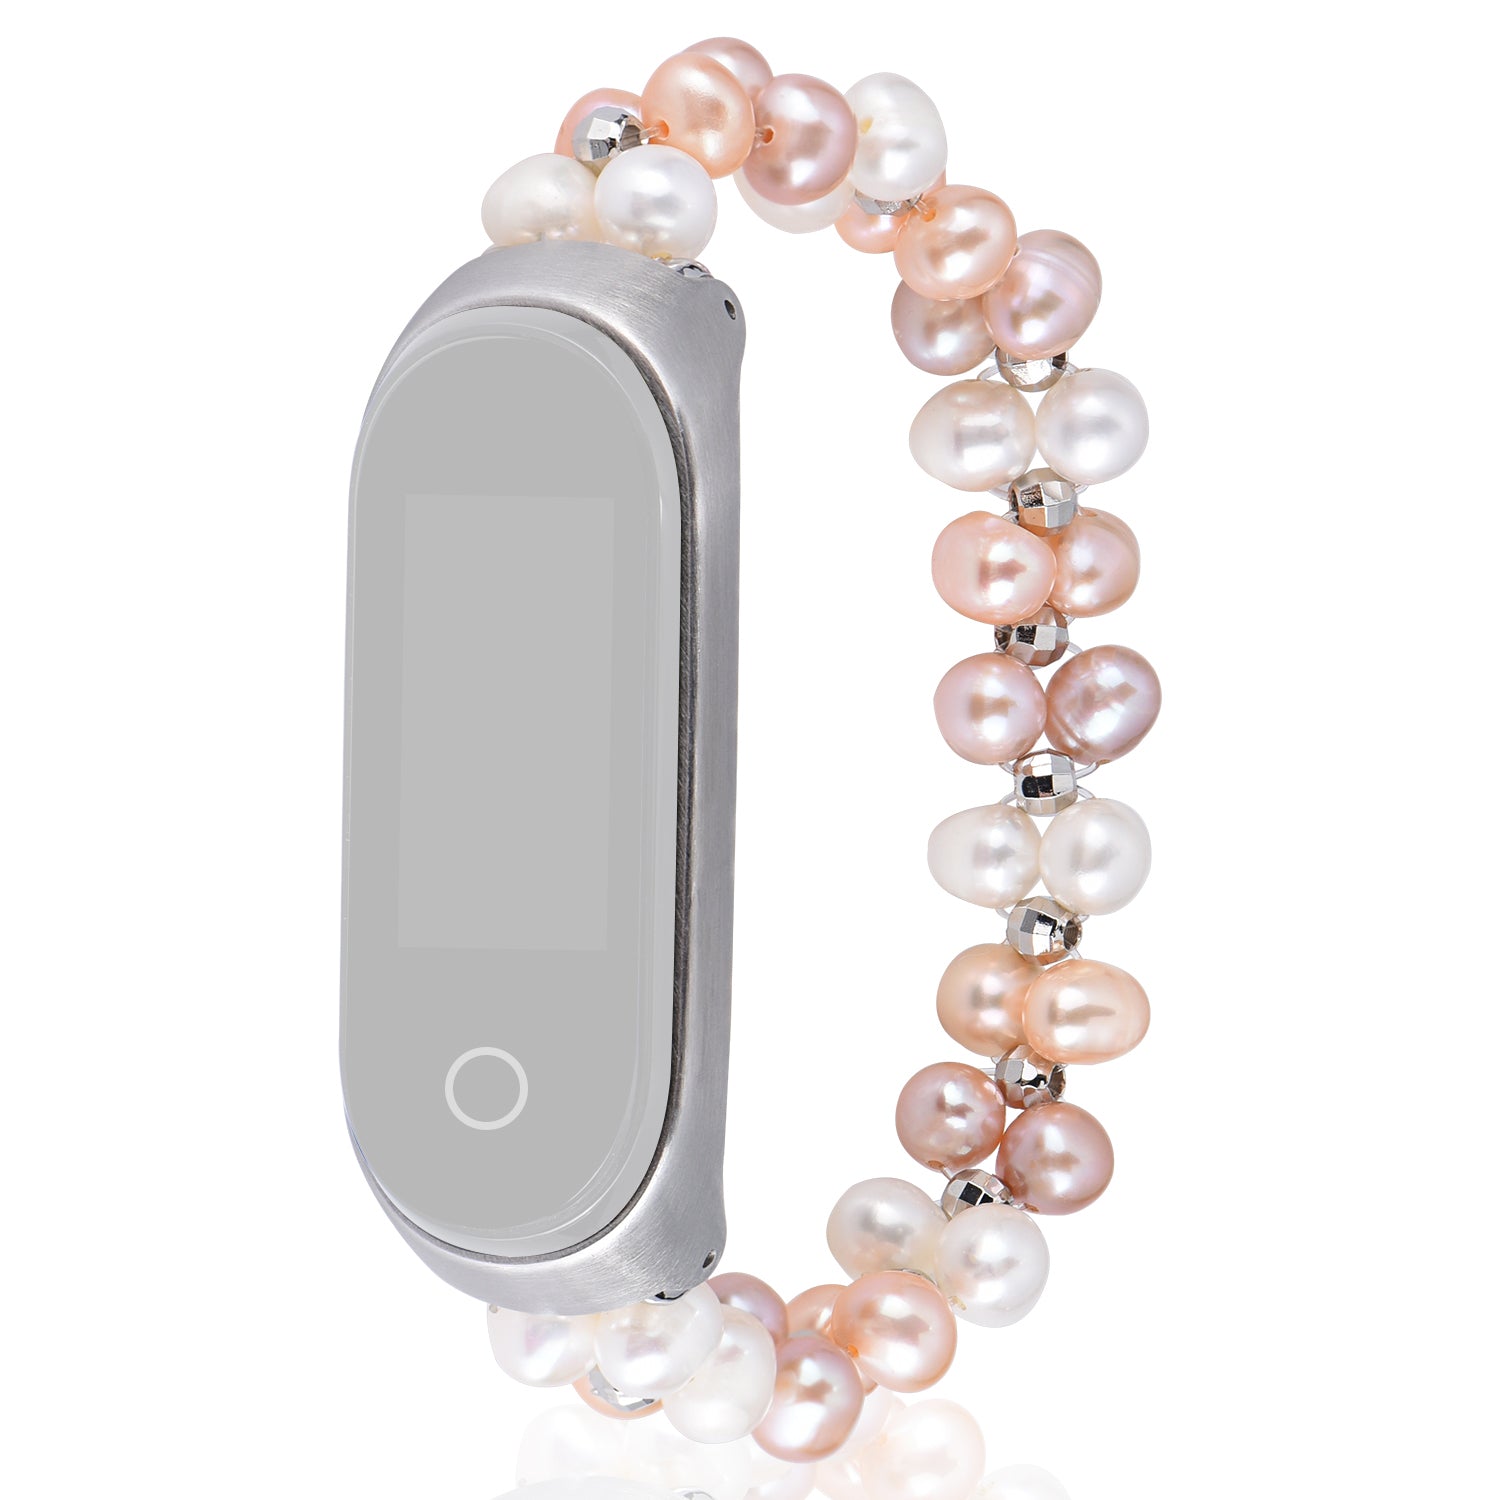 For Xiaomi Mi Band 5/6 Pearls Bracelet Smart Watch Band Replacement Wrist Strap - Colorful